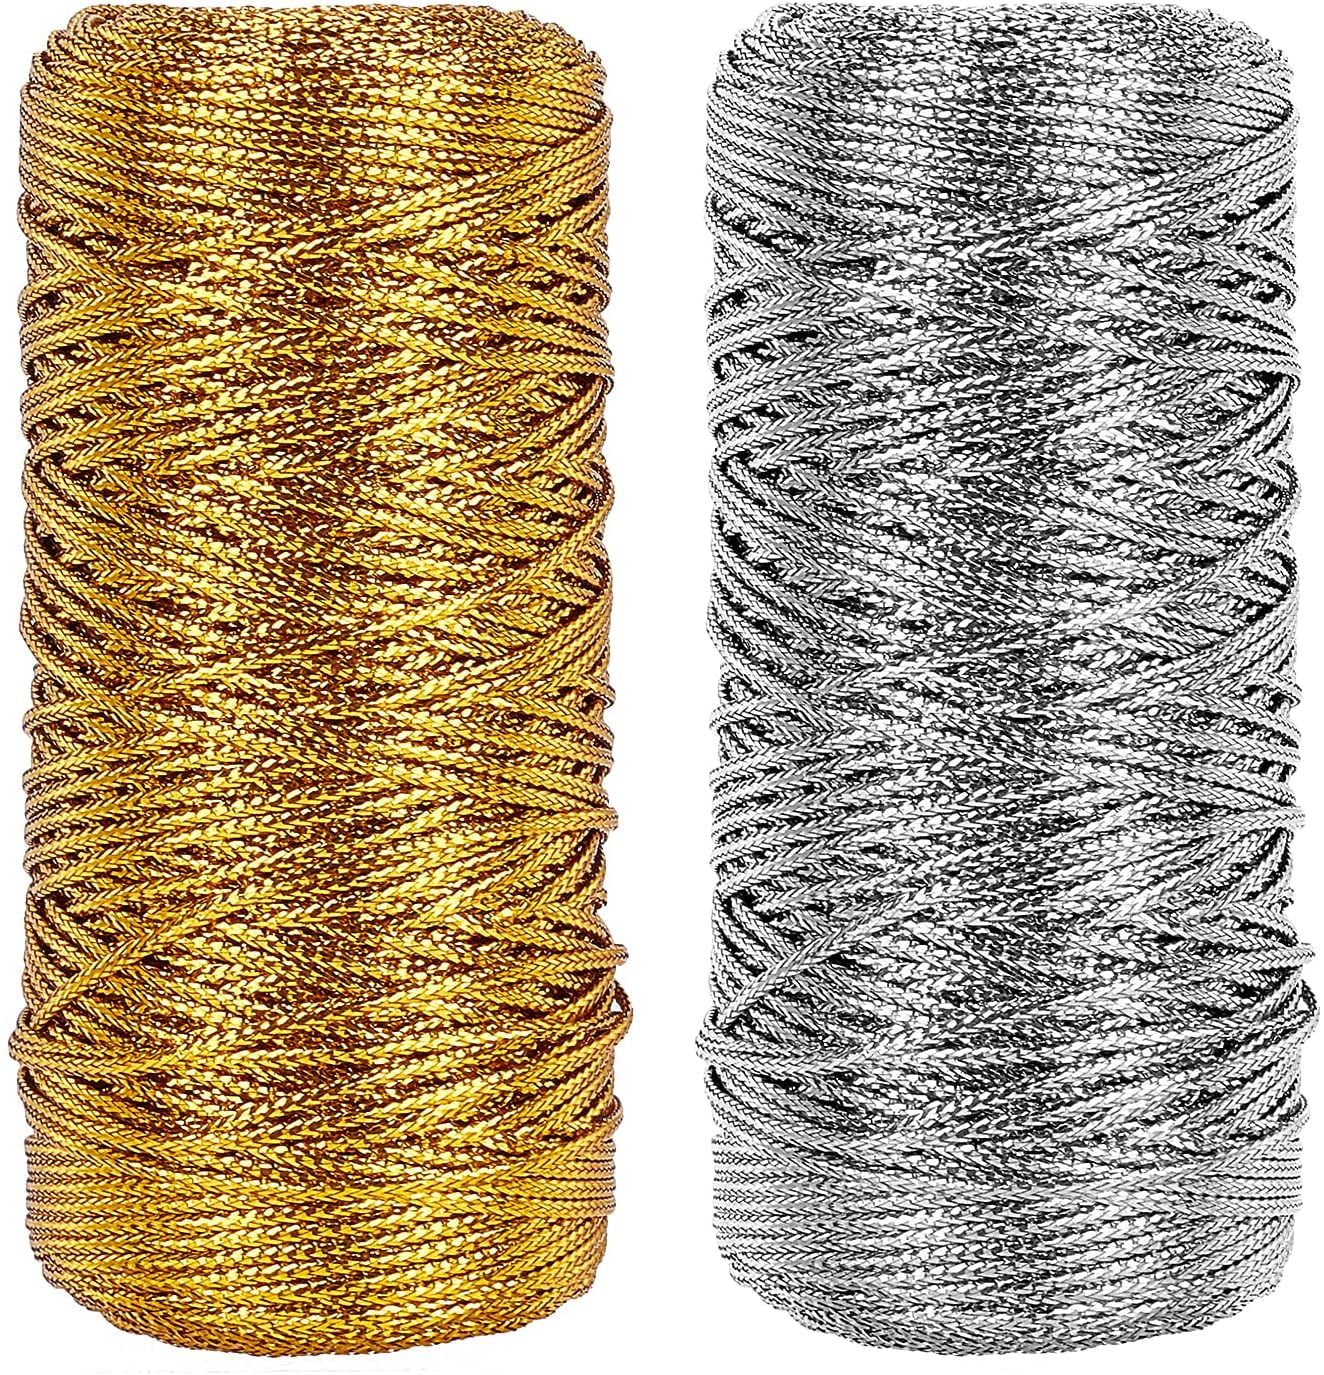  Silver Thread,Tag Thread,Silver String Metallic Cord Jewelry  Thread Craft String Lift Cord for Wrapping, Hair Braiding and Craft Making  100 Yards-1mm (Silver)